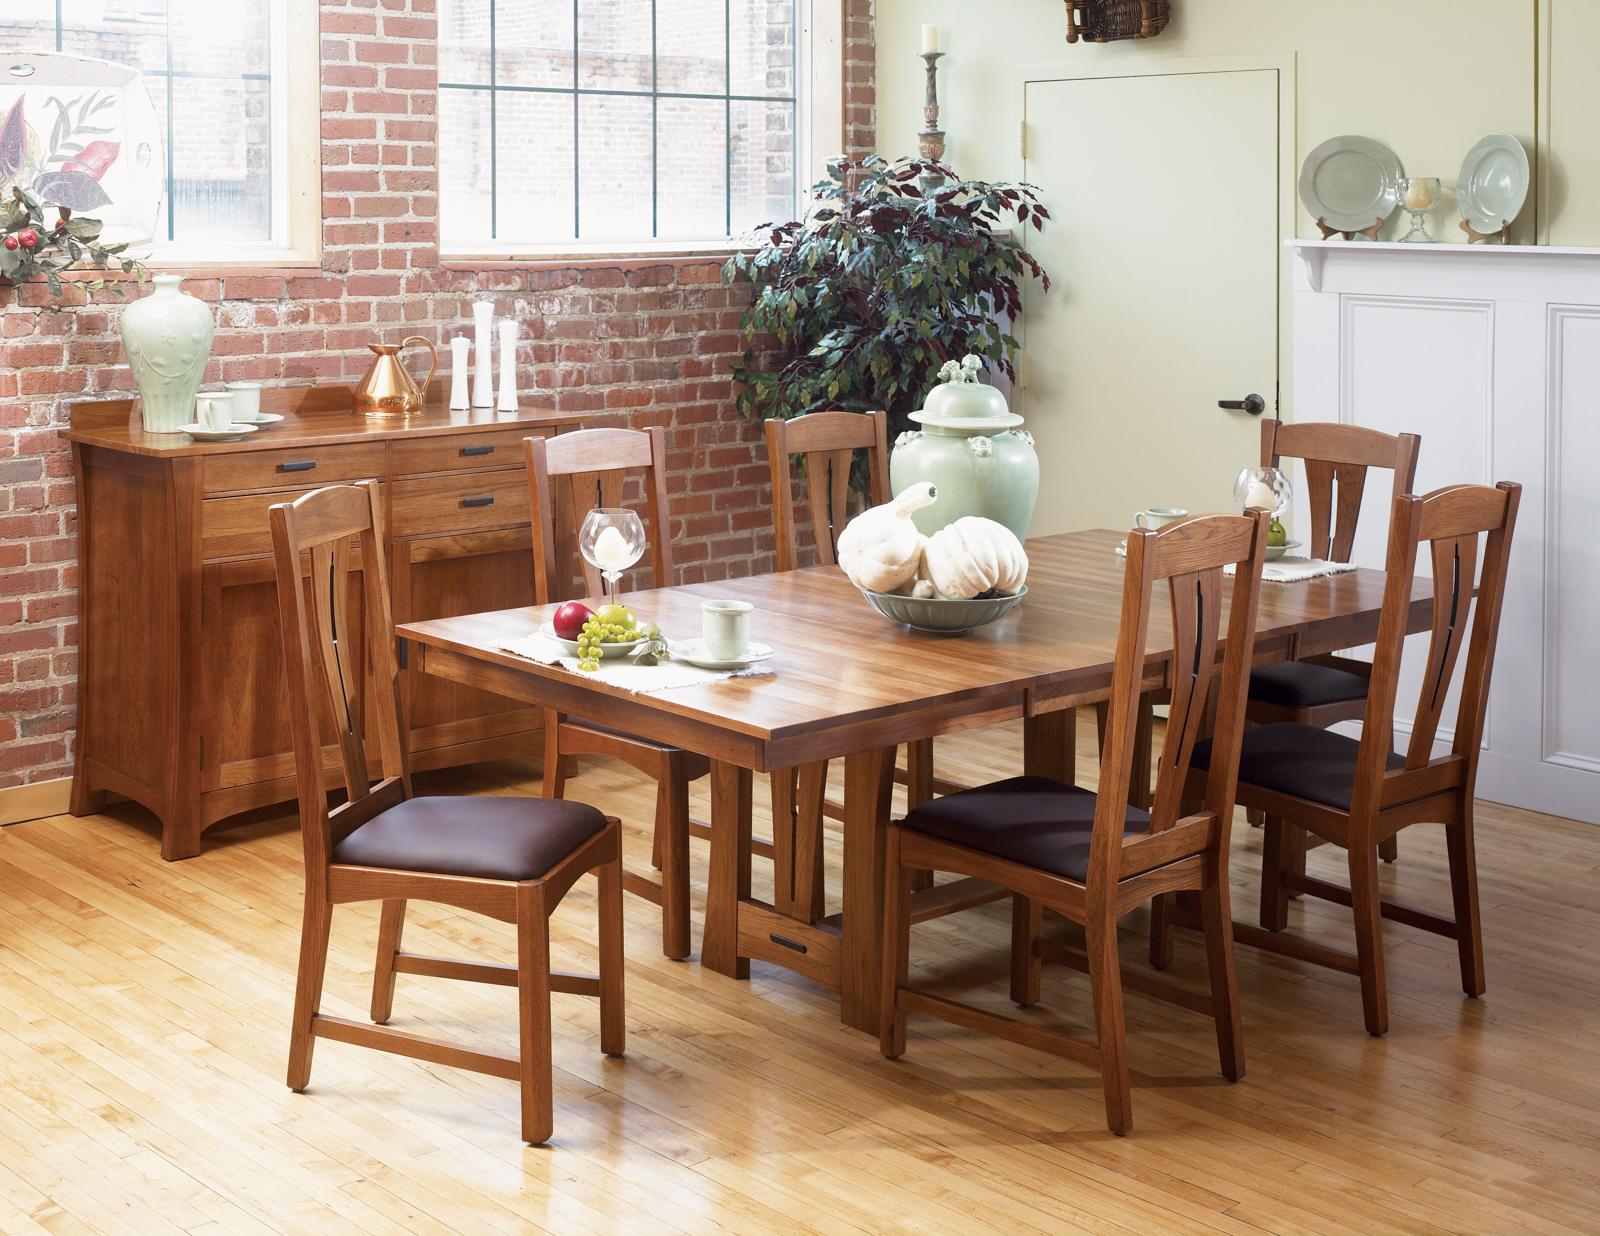 Rustic Dining Table Set Cattail Bungalow CATAM6300-Set-7 in Amber, Light Brown Top grain leather